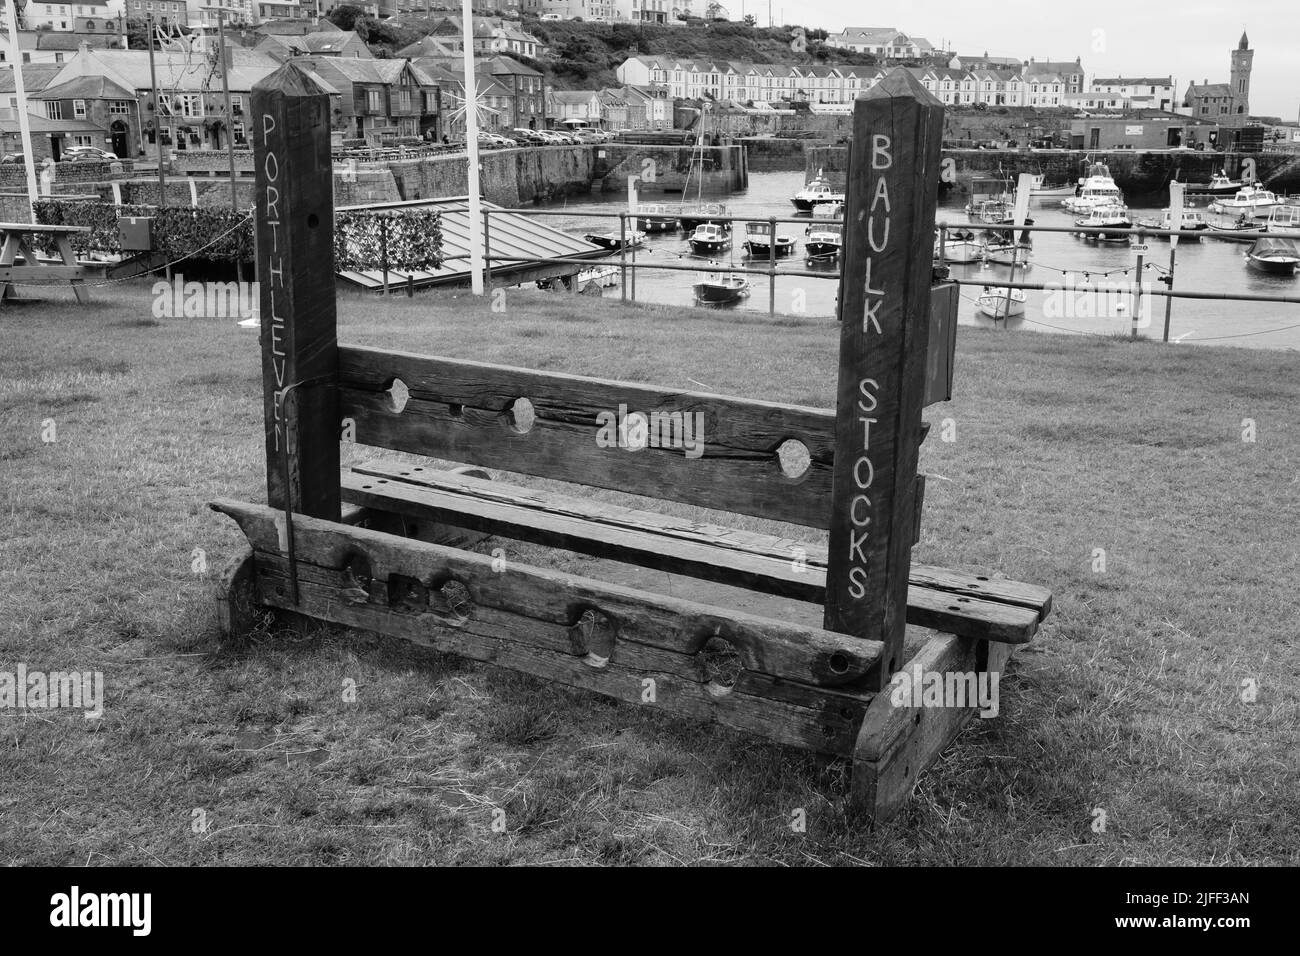 Wooden Stocks in Porthleven, Cornwall Stock Photo